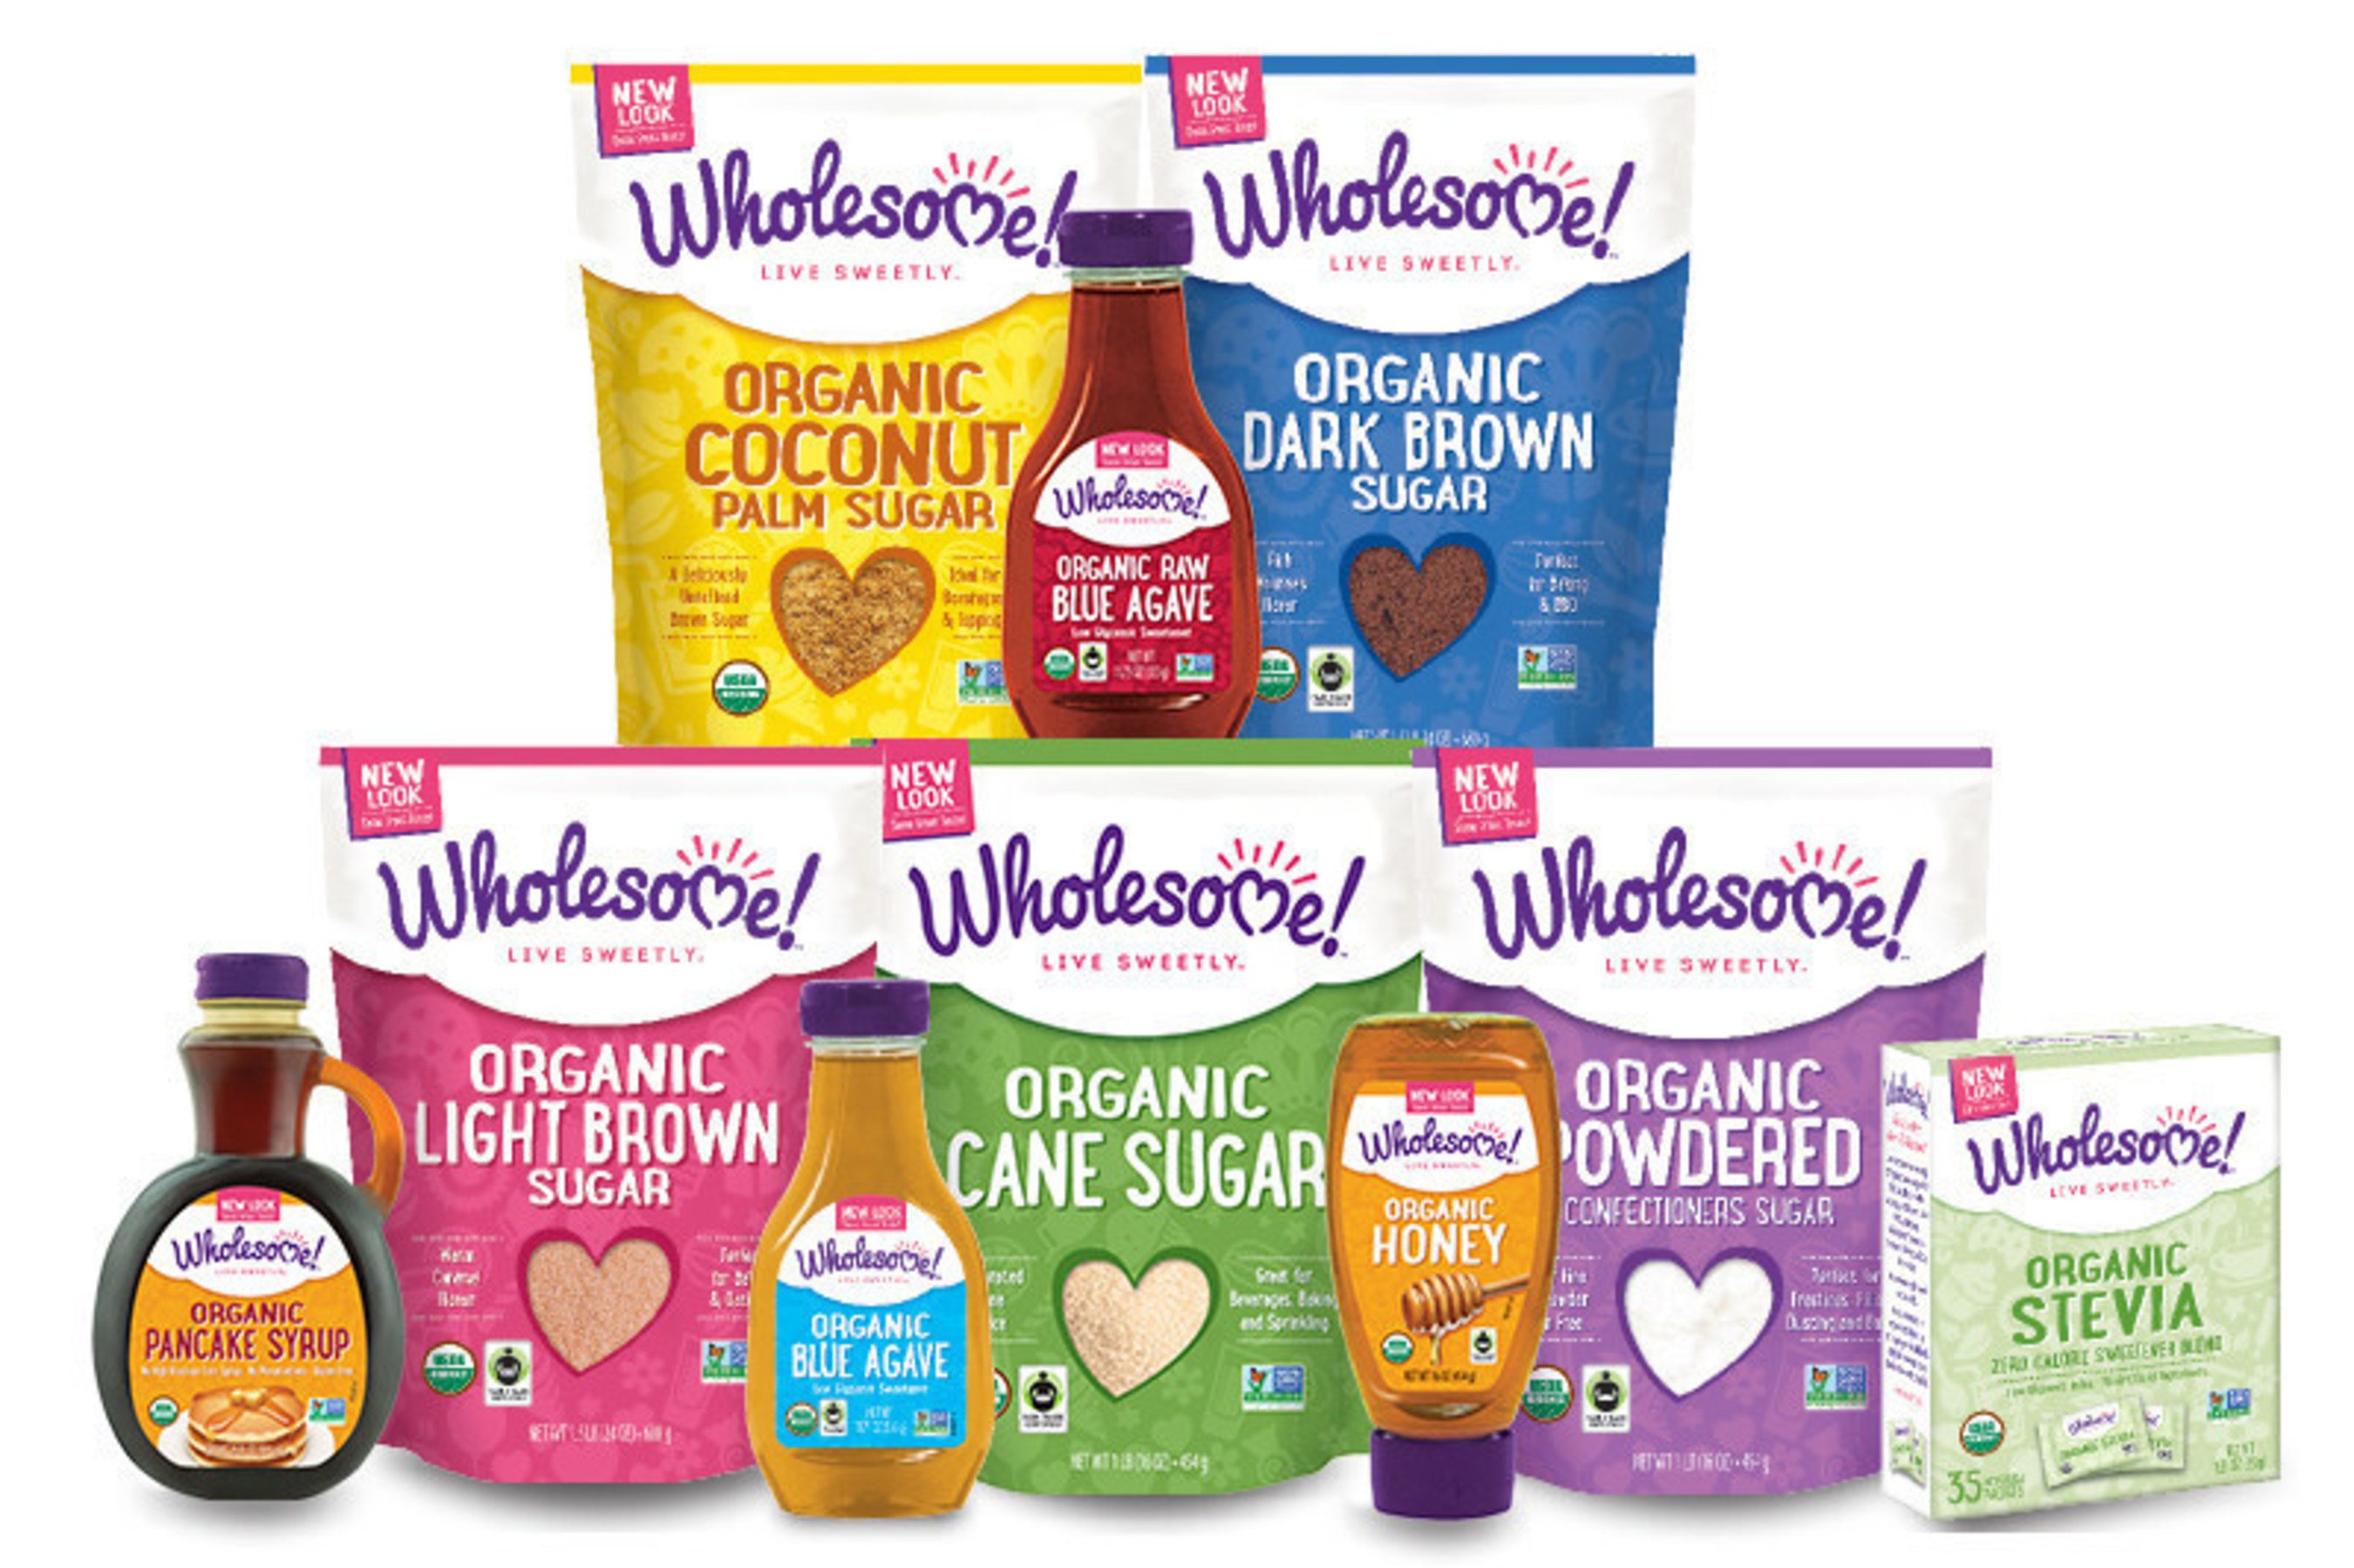 In honor of Earth Day, Wholesome!(TM) celebrates 14 years of sustainable, eco-friendly agriculture throughout its organic sweetener business. Today, the company has more than 50 products all sourced from sustainable farms around the world and stands as the leading U.S. brand of Organic, Fair Trade and Non-GMO sugars, syrups, stevia, honey and molasses.